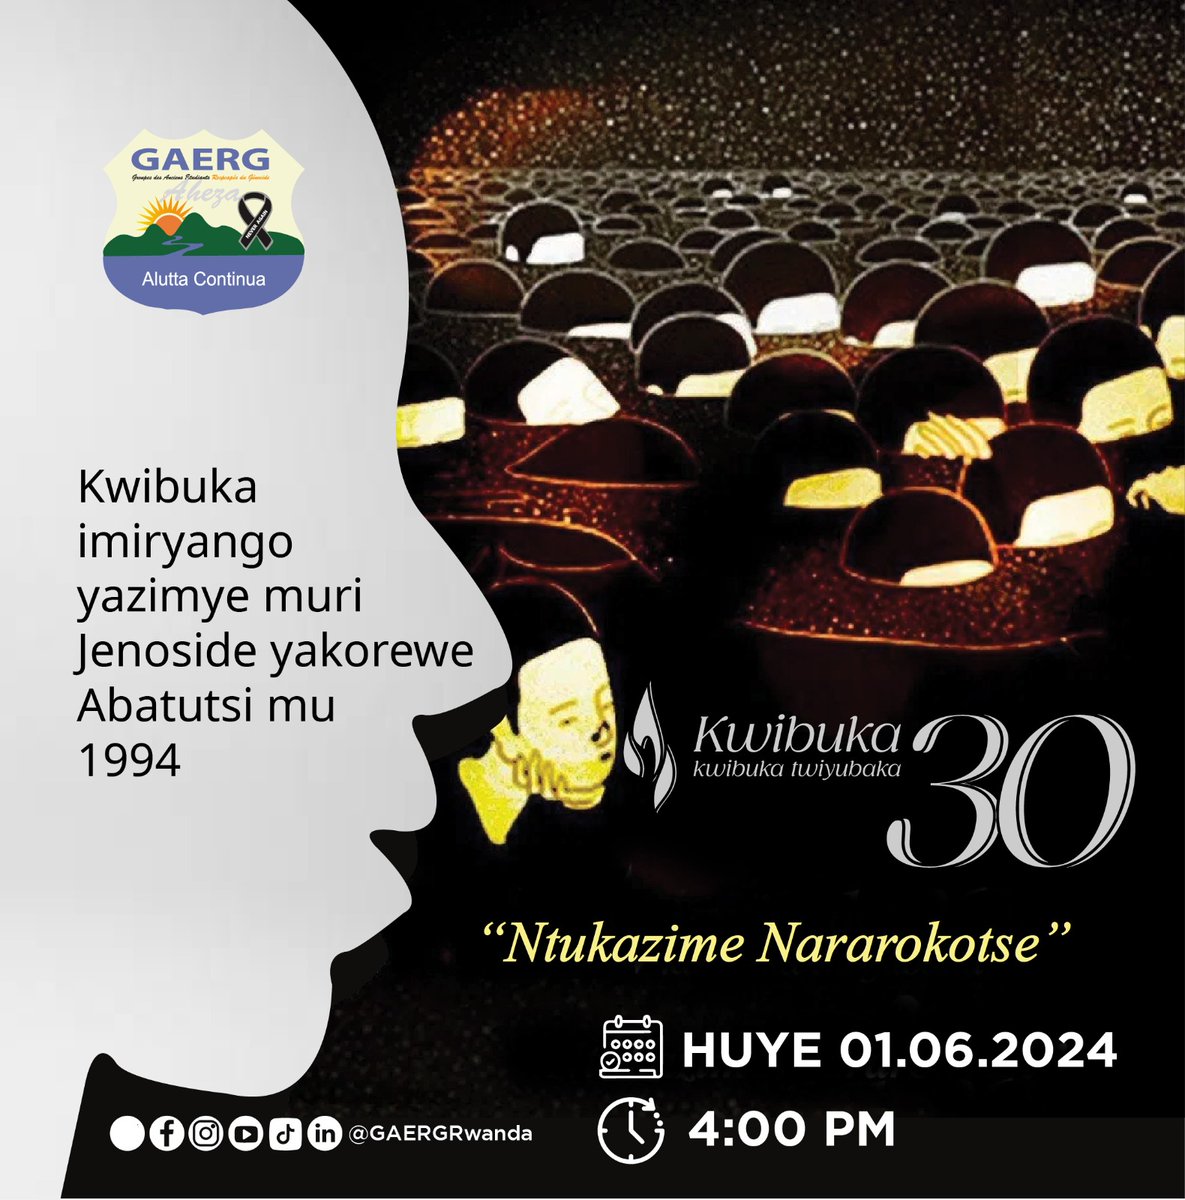 GAERG is honored to invite you to the commemoration of the families completely wiped out during the 1994 Genocide against the Tutsi. 📍 The event will take place in @HuyeDistrict 🏟️ Huye Stadium 🗓️:01.06.2024 ⏰:4 p.m Register here 👉gaerg.org.rw/kwibuka-imirya…